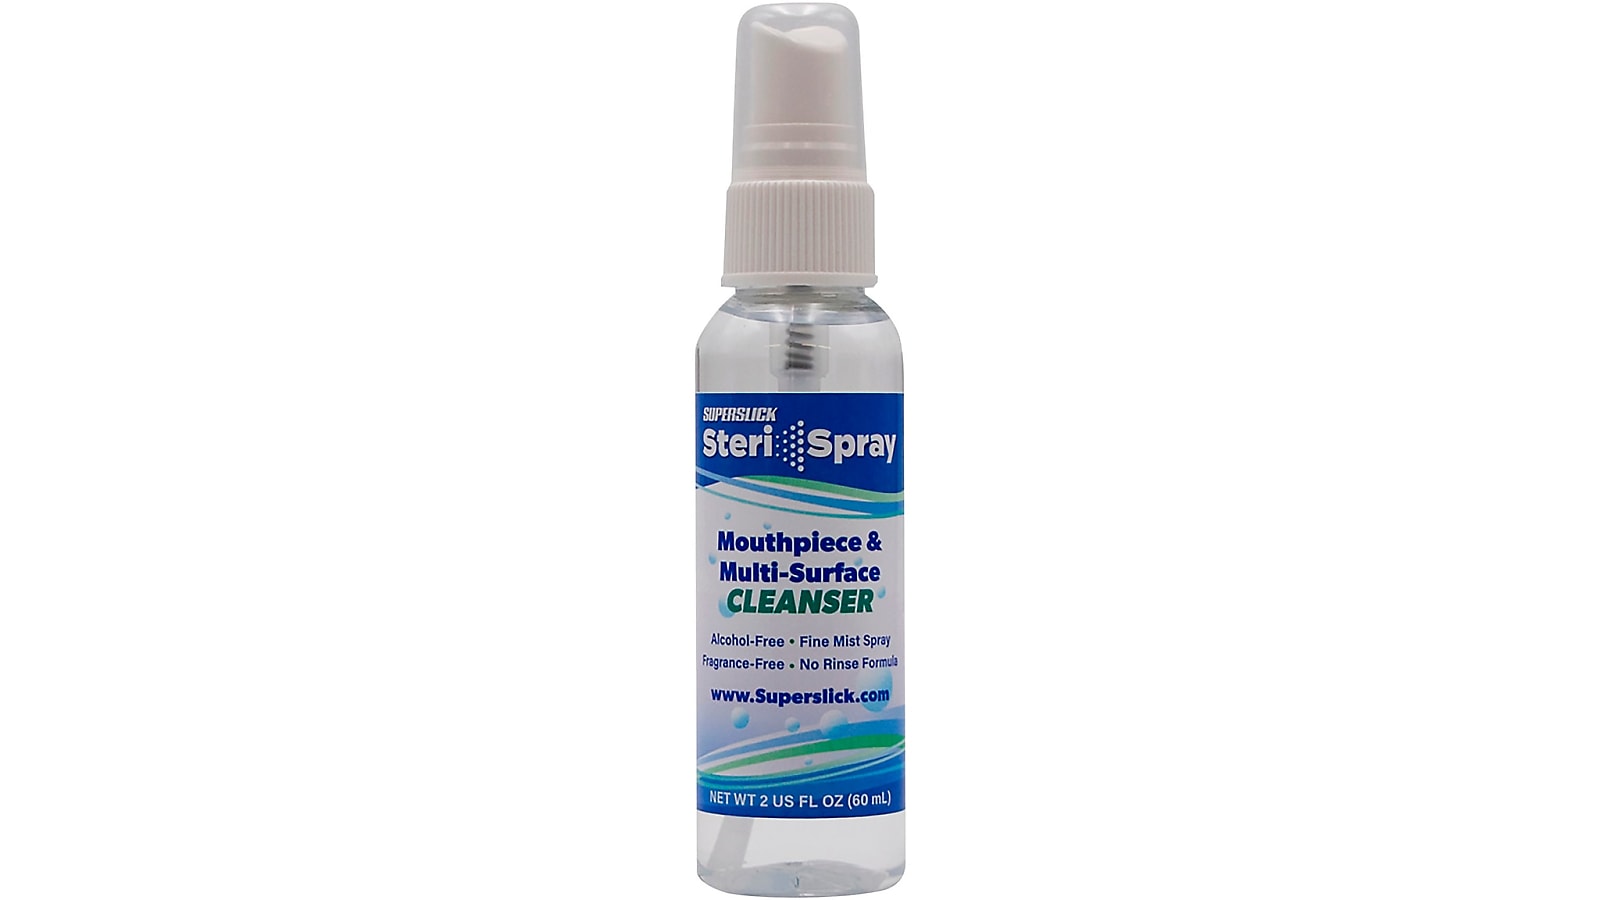 Superslick Steri-Spray Mouthpiece and Multi-Surface Cleanser - 2oz